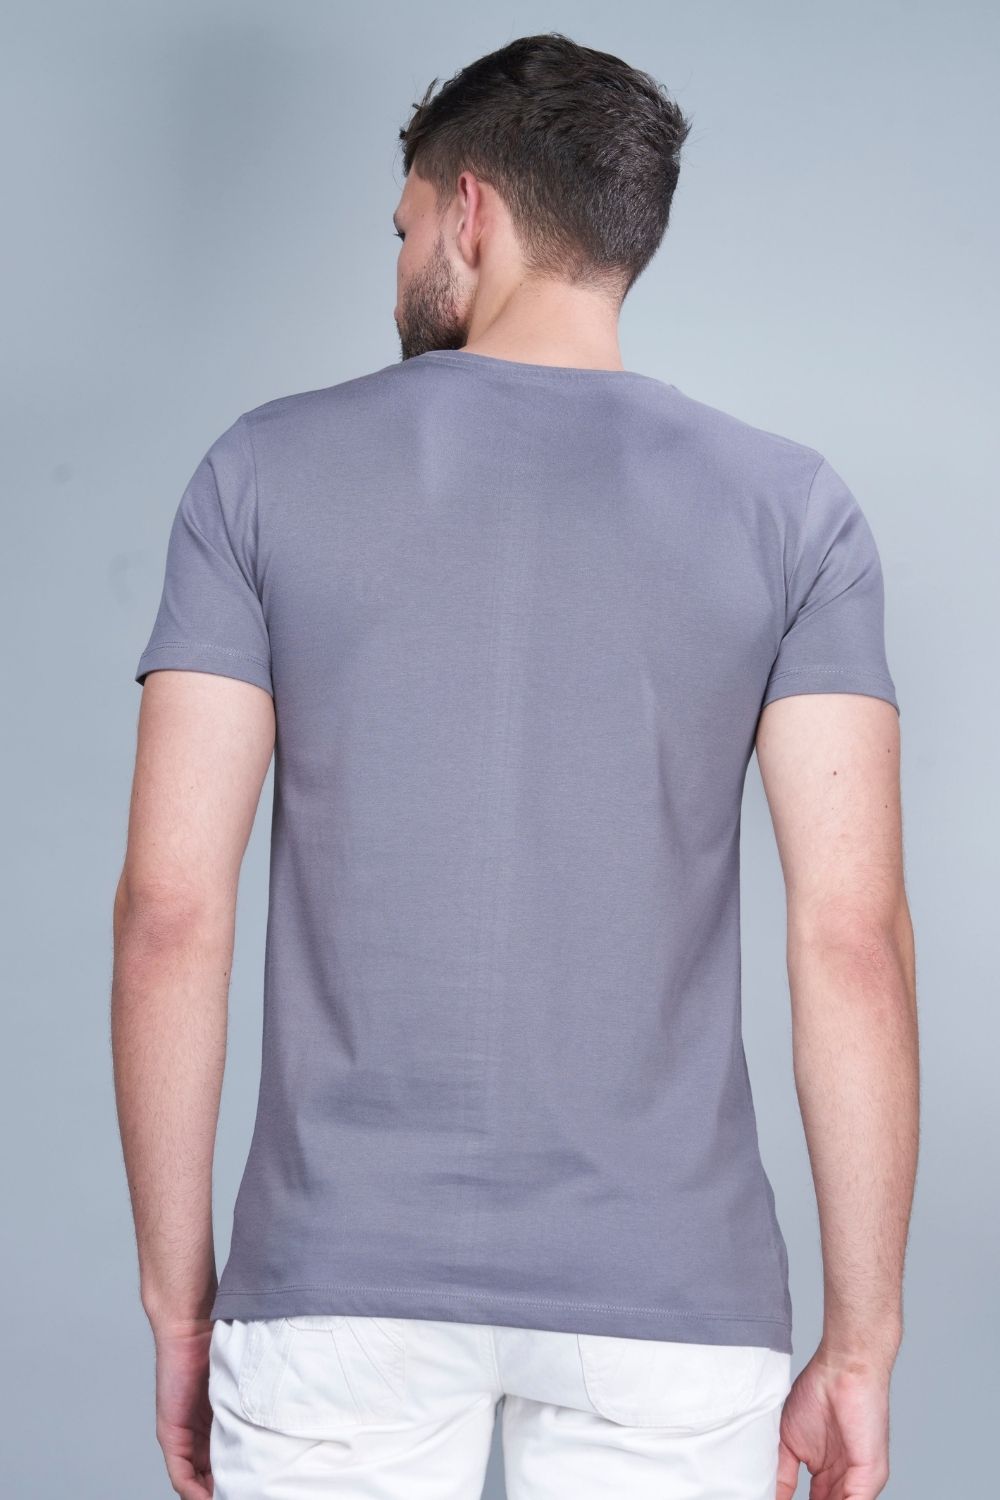 Vista Blue colored, solid t shirt for men with round neck and half sleeves, back view.